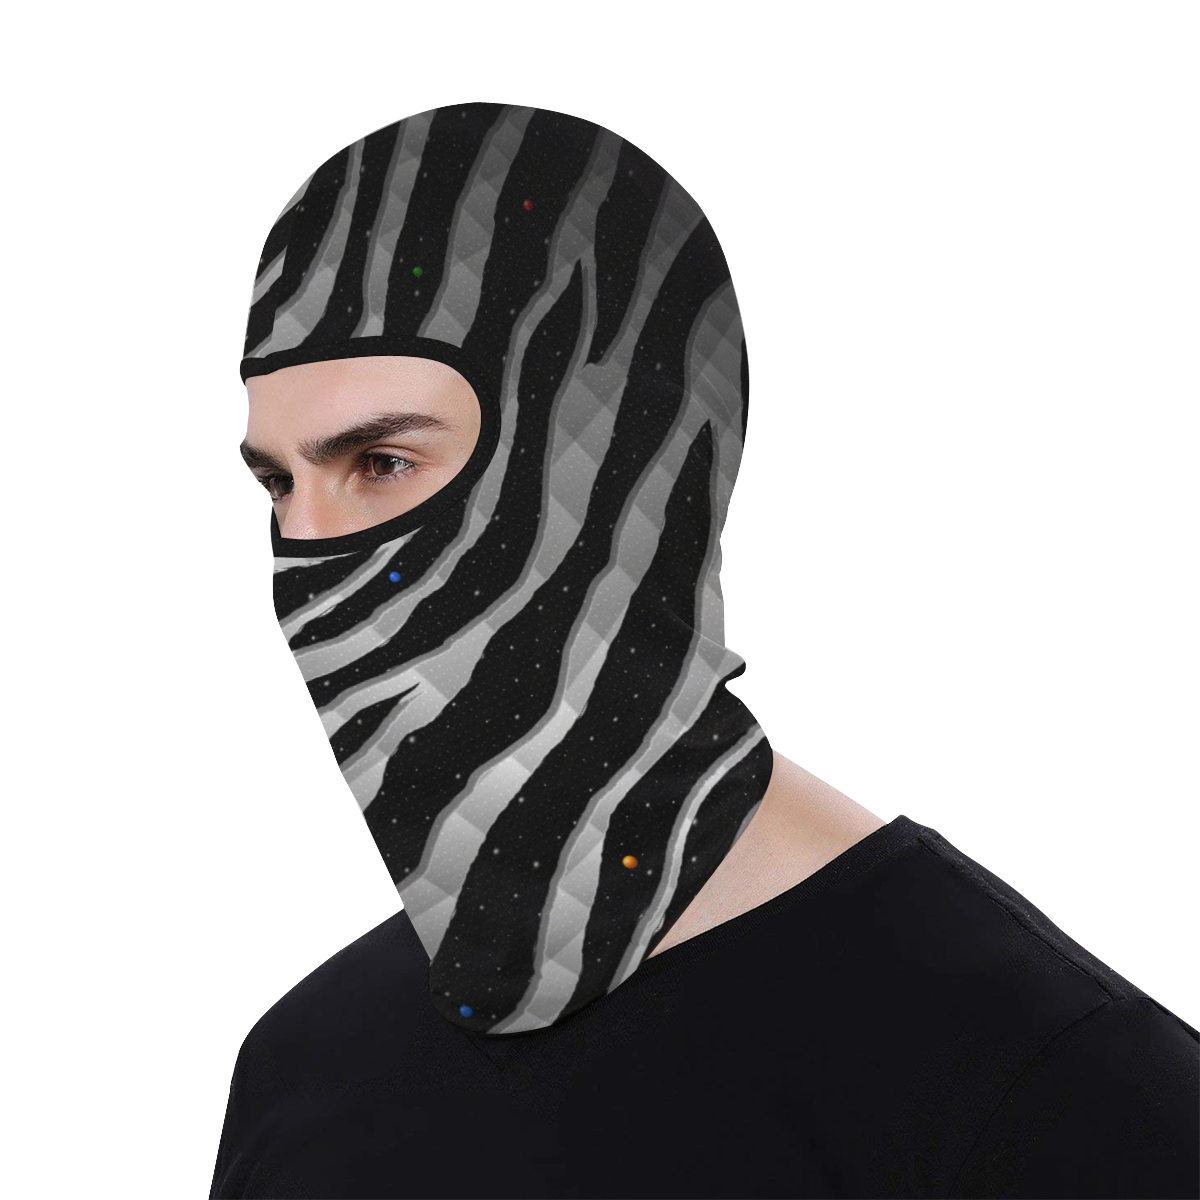 Ripped SpaceTime Stripes - Black/White All Over Print Balaclava